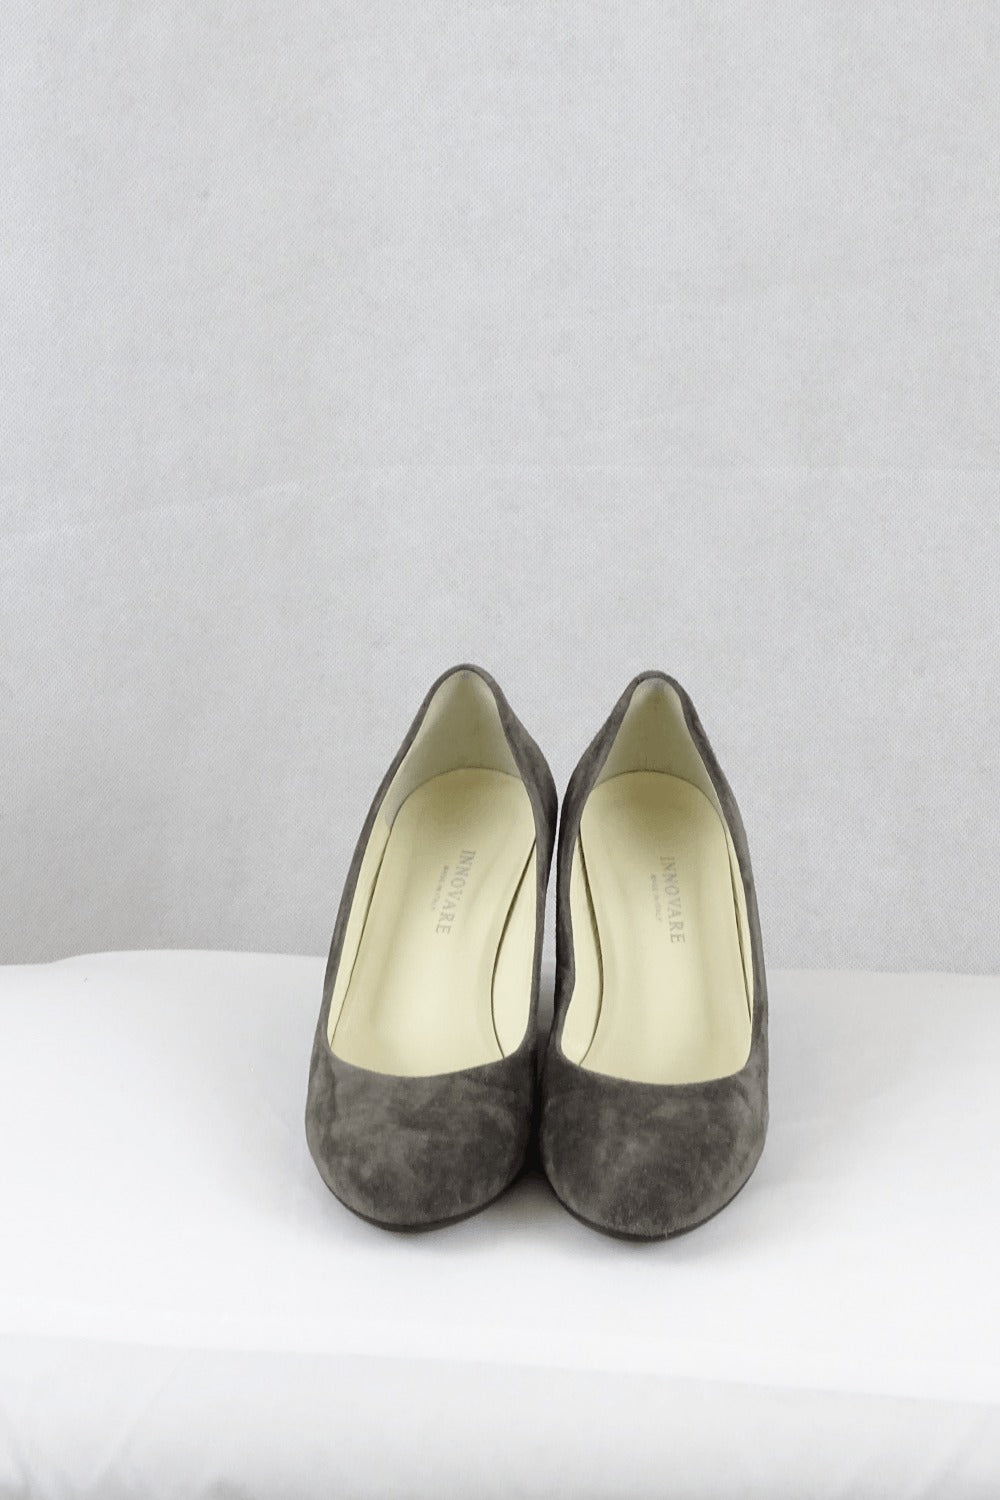 Innovare Suede Grey Wedged Shoes 37.5